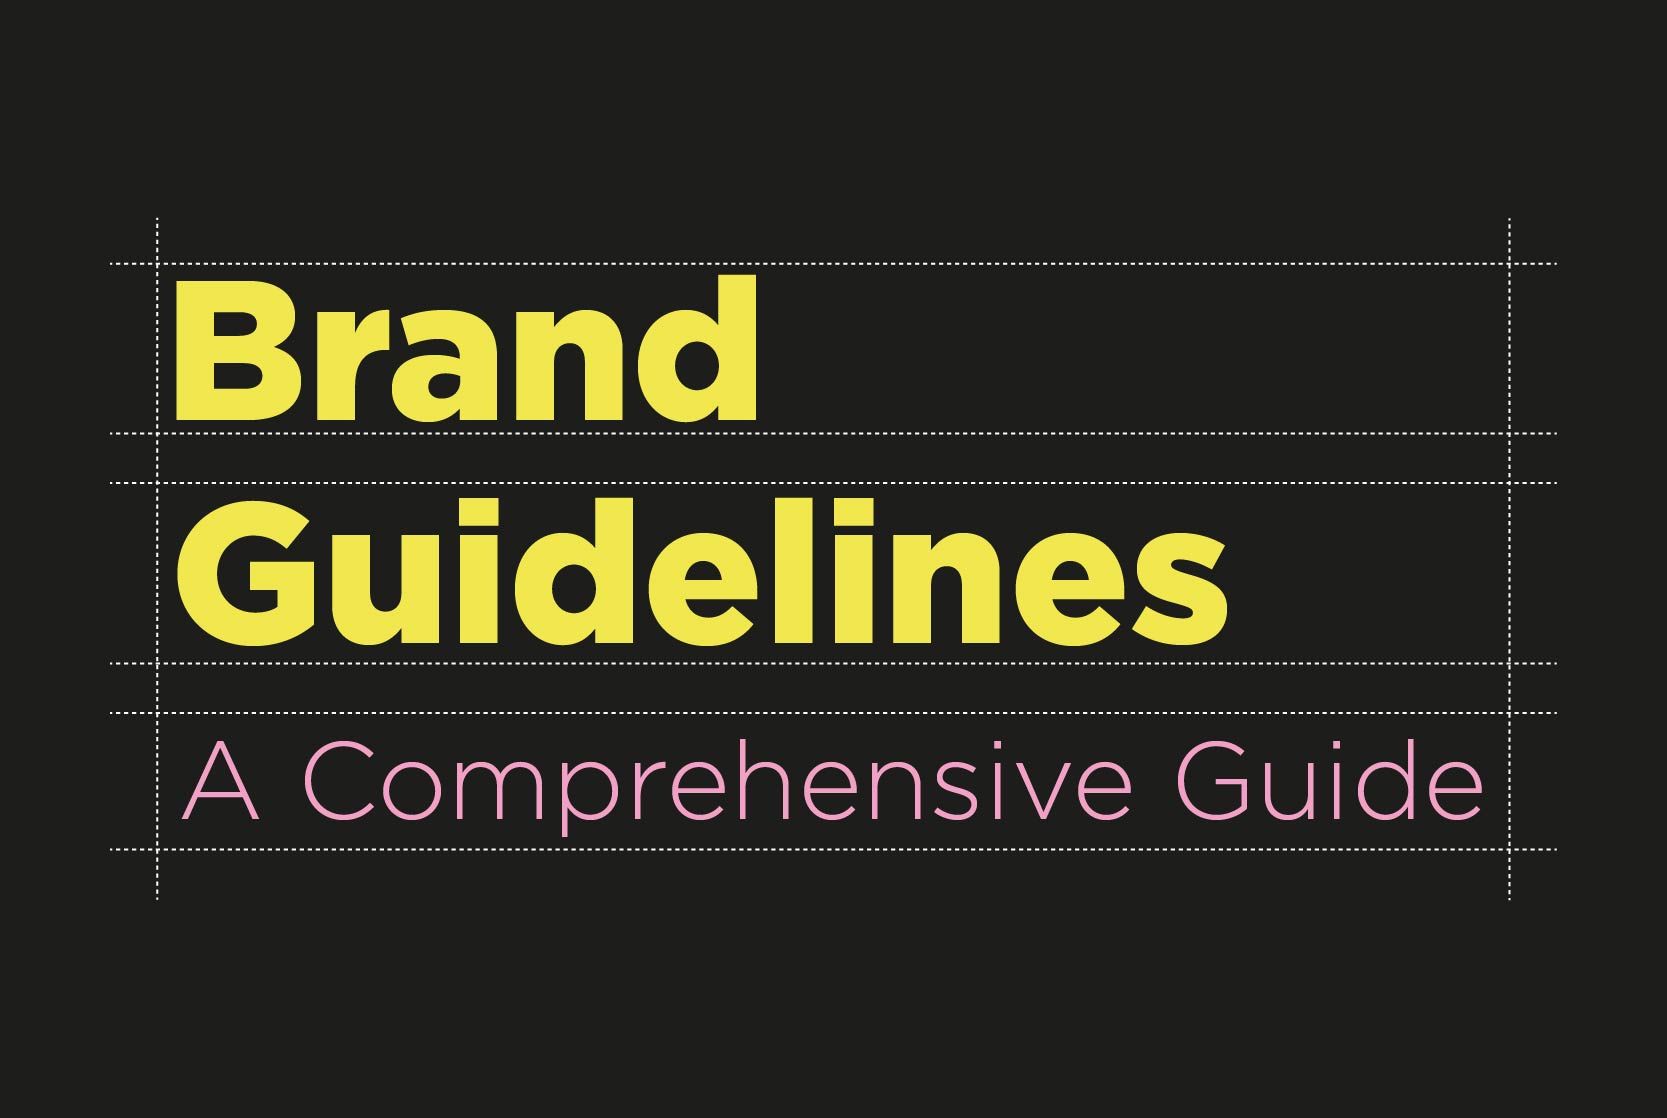 Brand guidelines: a comprehensive guide